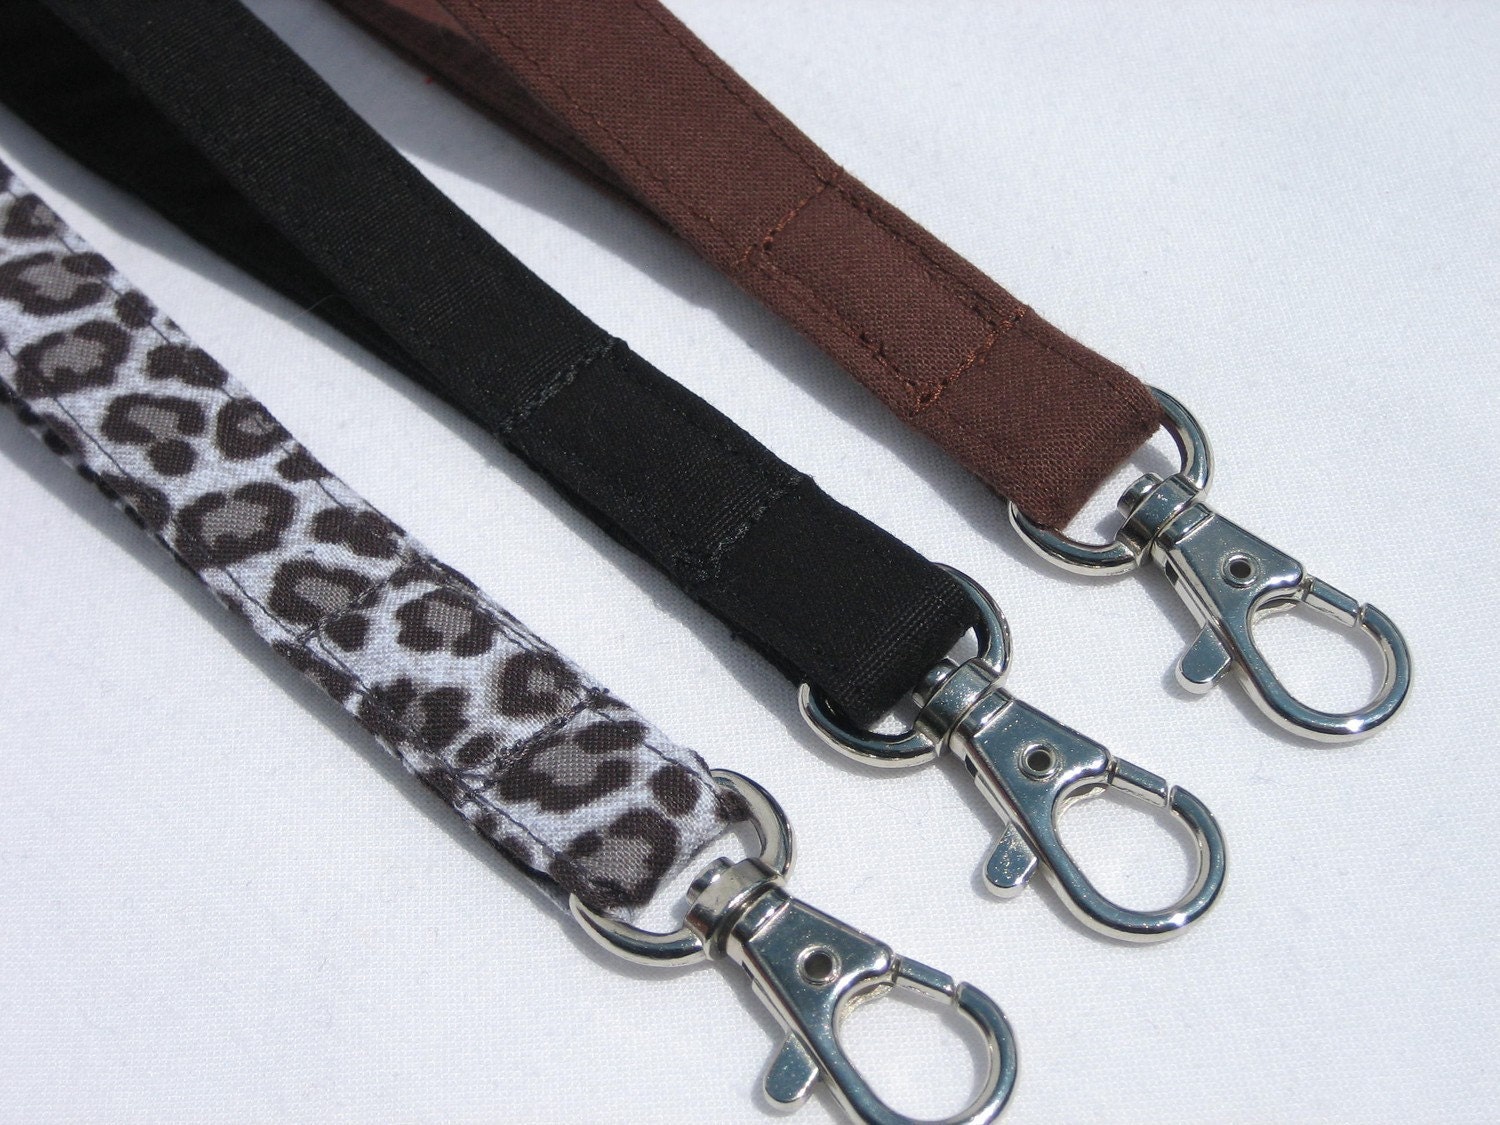 LANYARD/NECK strap Add lanyard neck strap to your cellphone